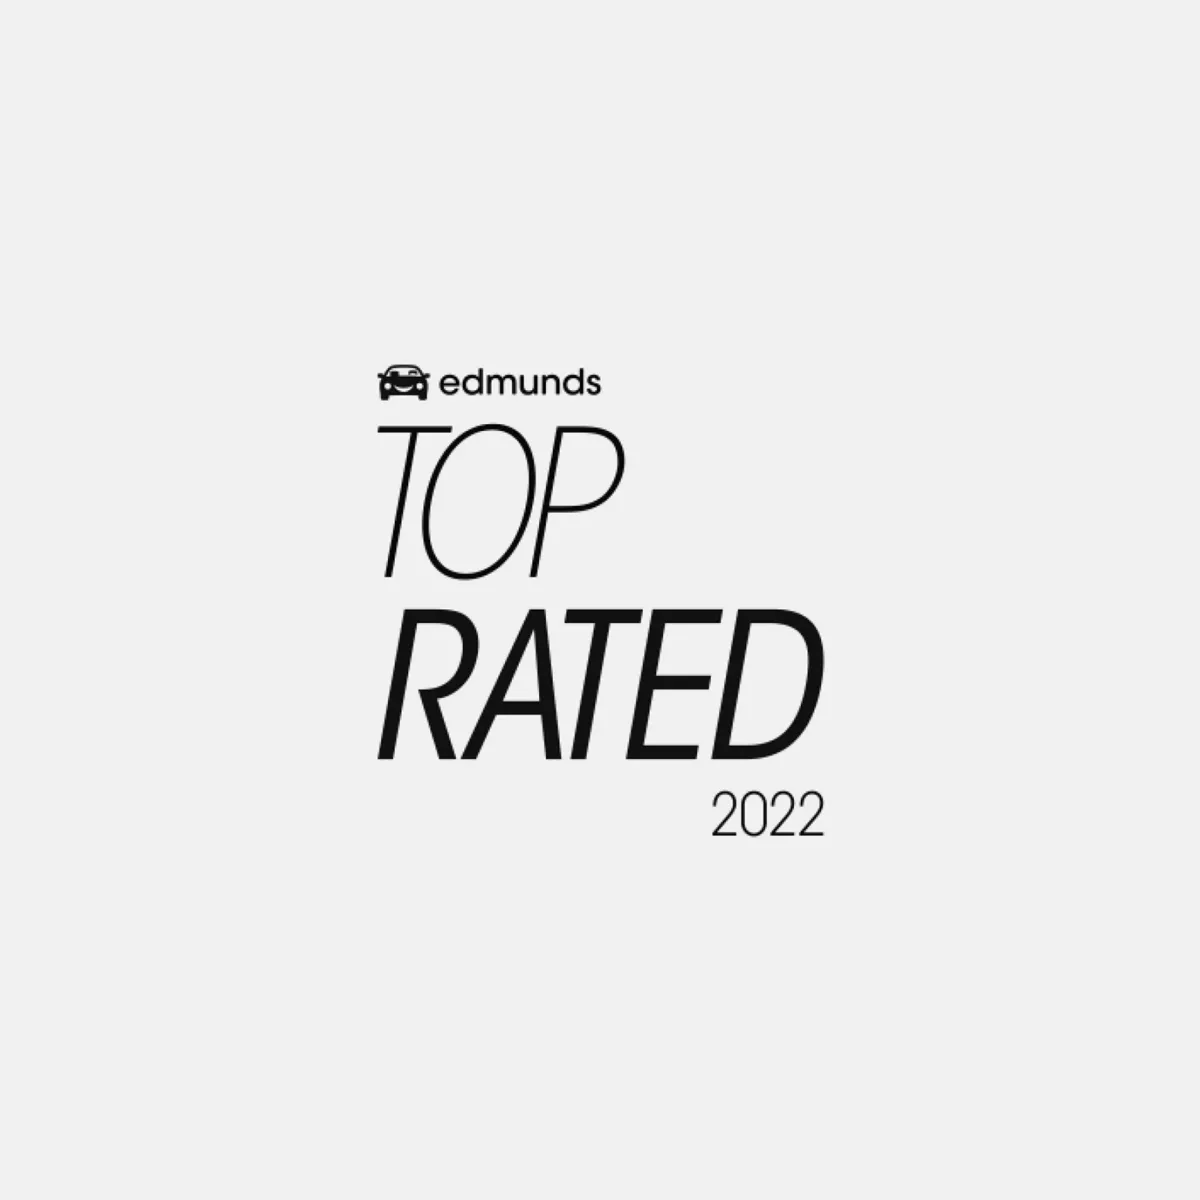 Edmunds top rated 2022.